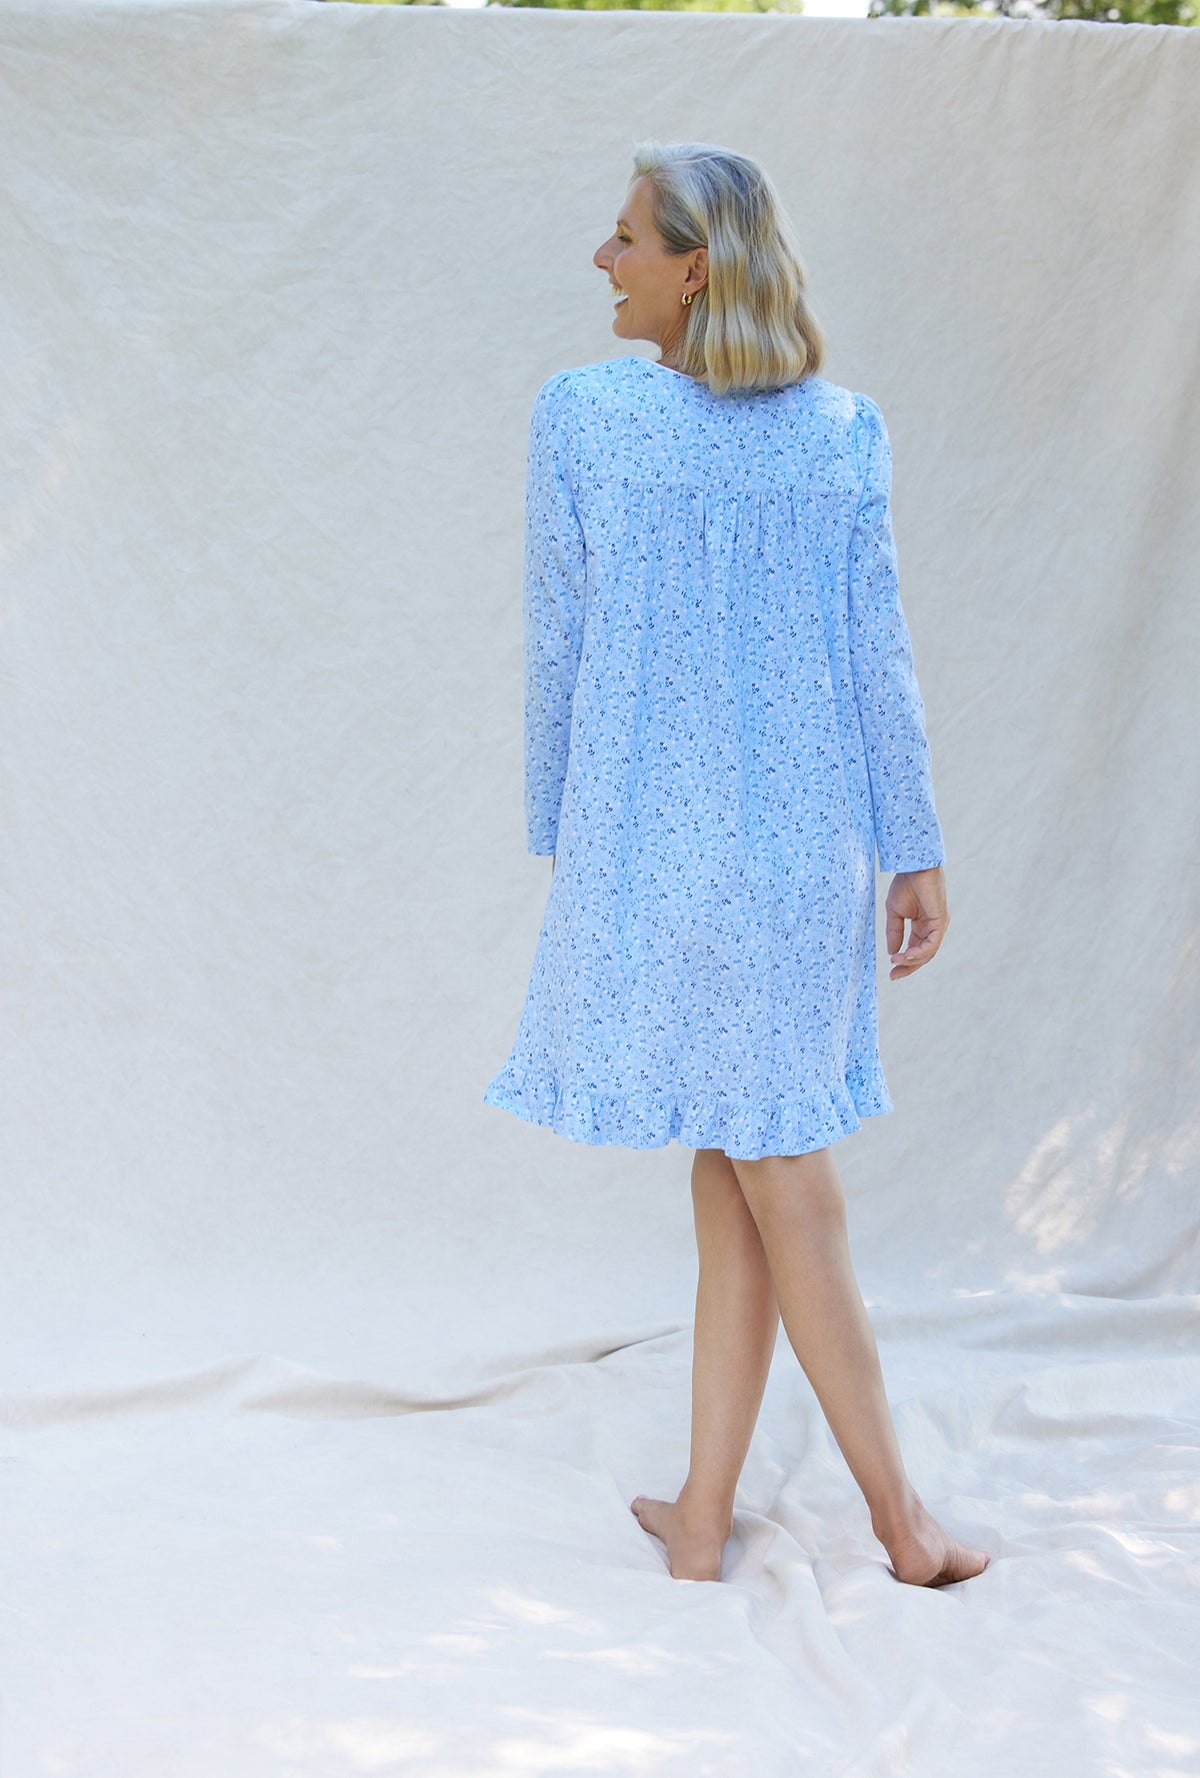 A lady wearing a blue denim floral long sleeve cotton knit short nightgown.